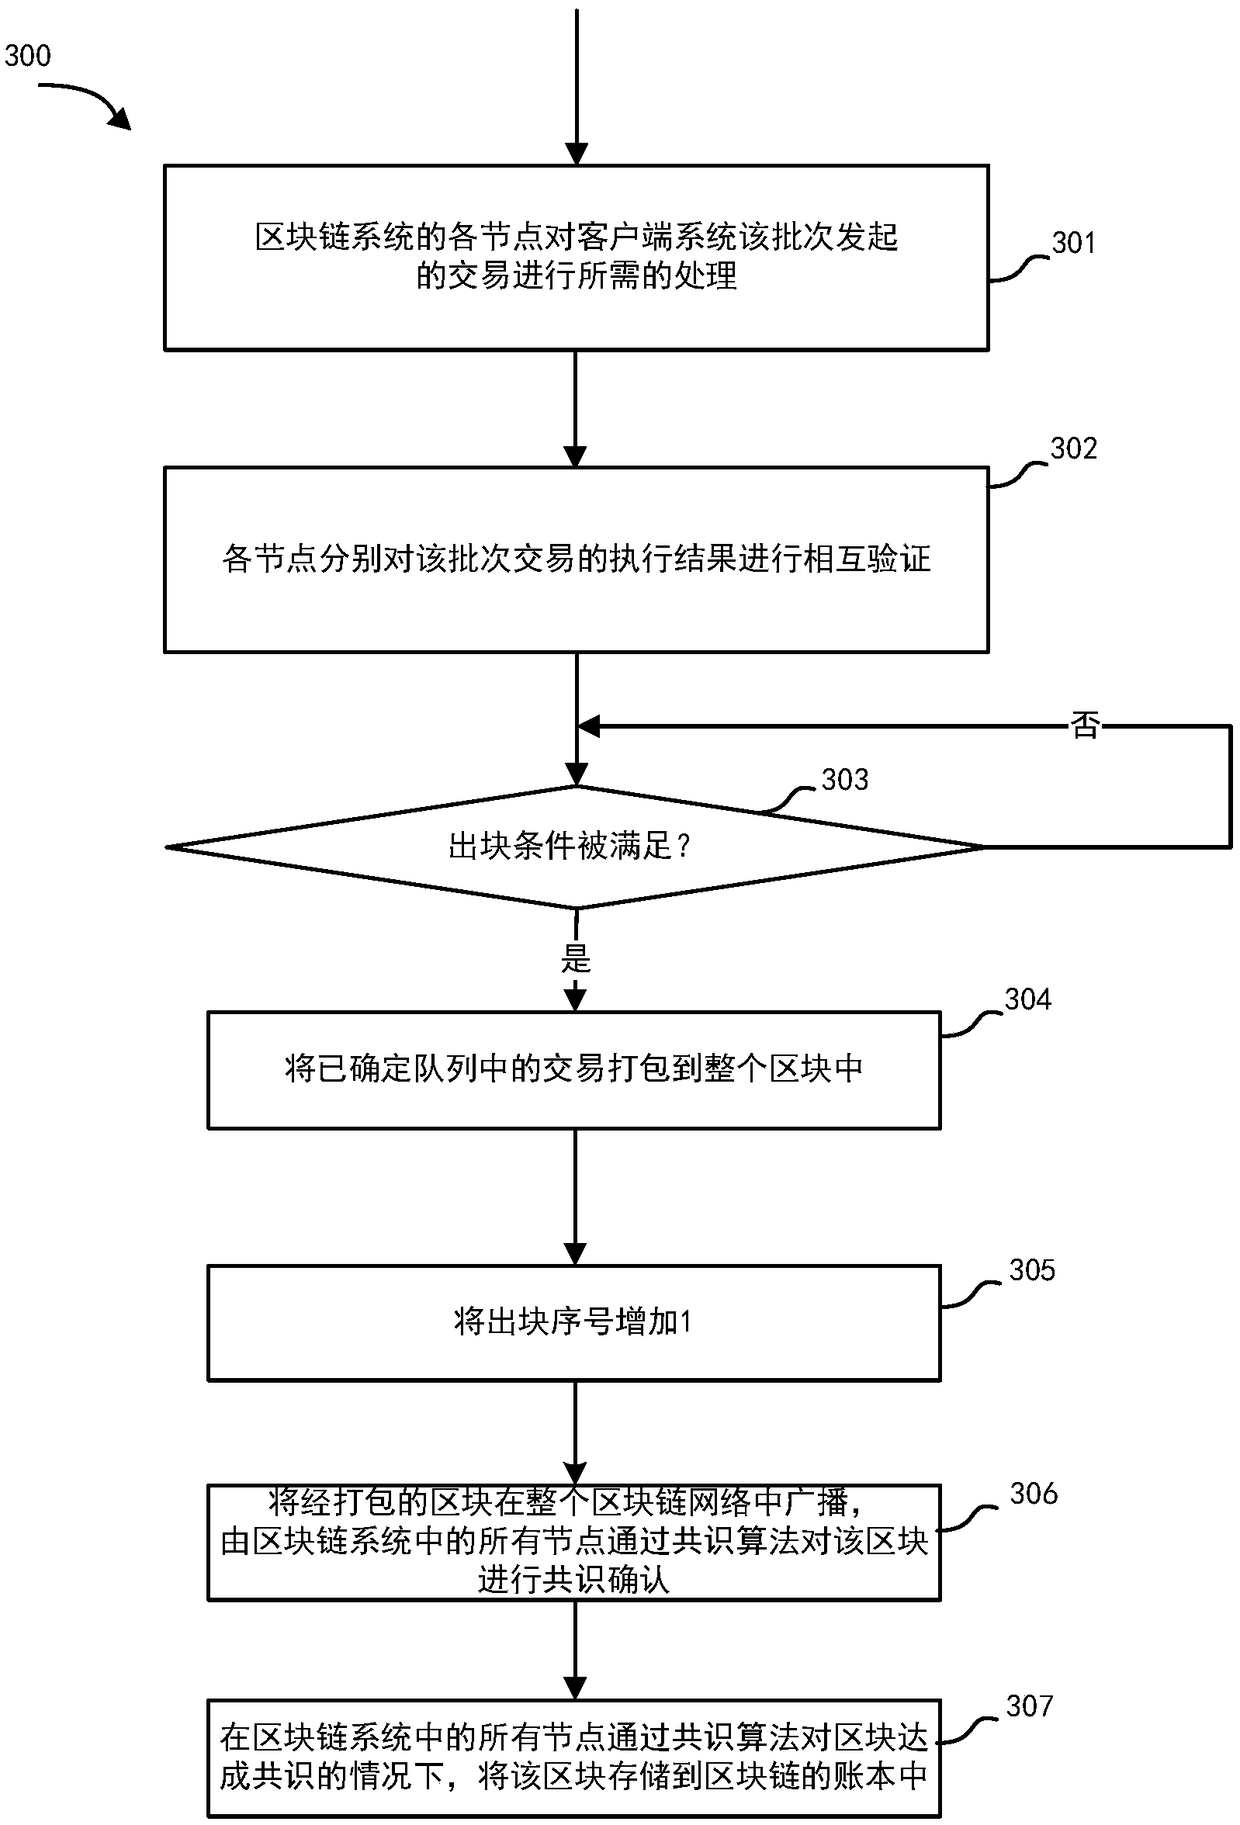 Transaction processing method and device based on block chain